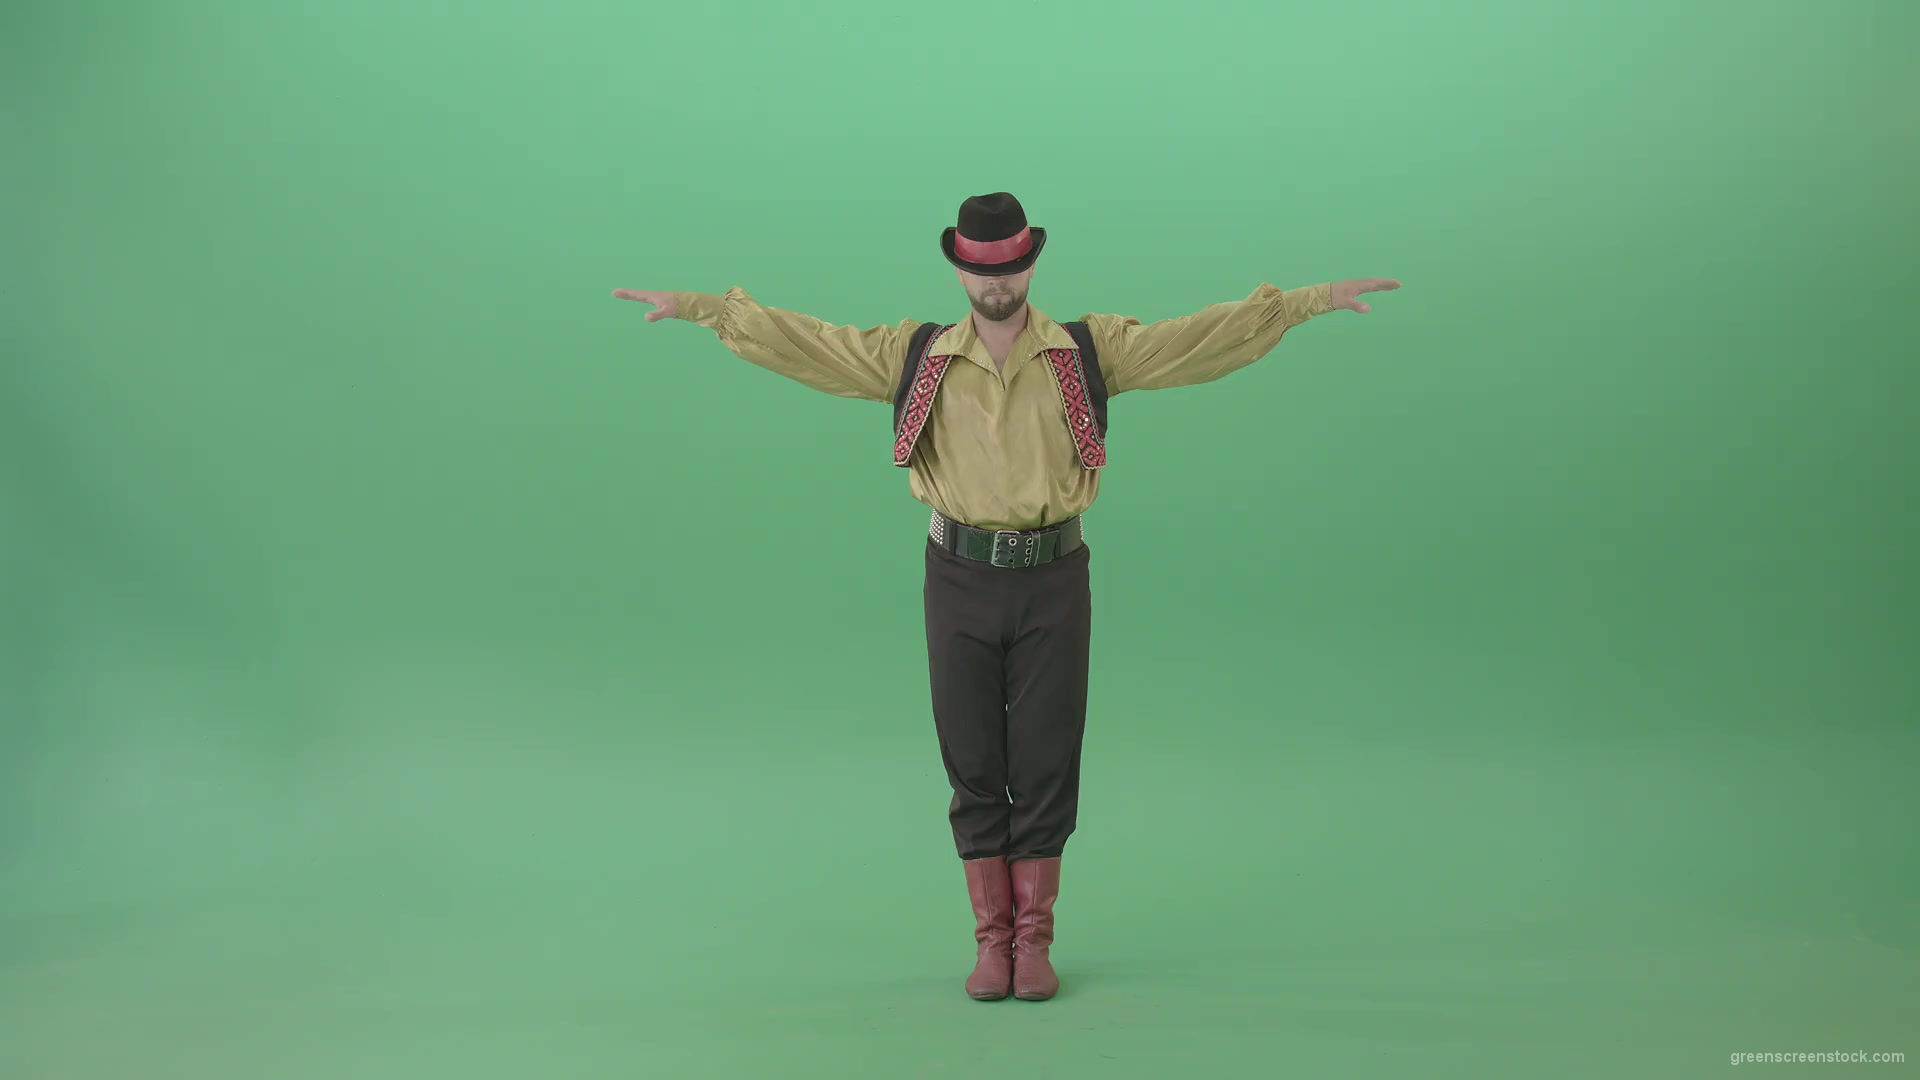 Balkan-Gipsy-Man-dancing-and-jump-isolated-on-green-screen-4K-30-fps-Video-Footage-1920_001 Green Screen Stock